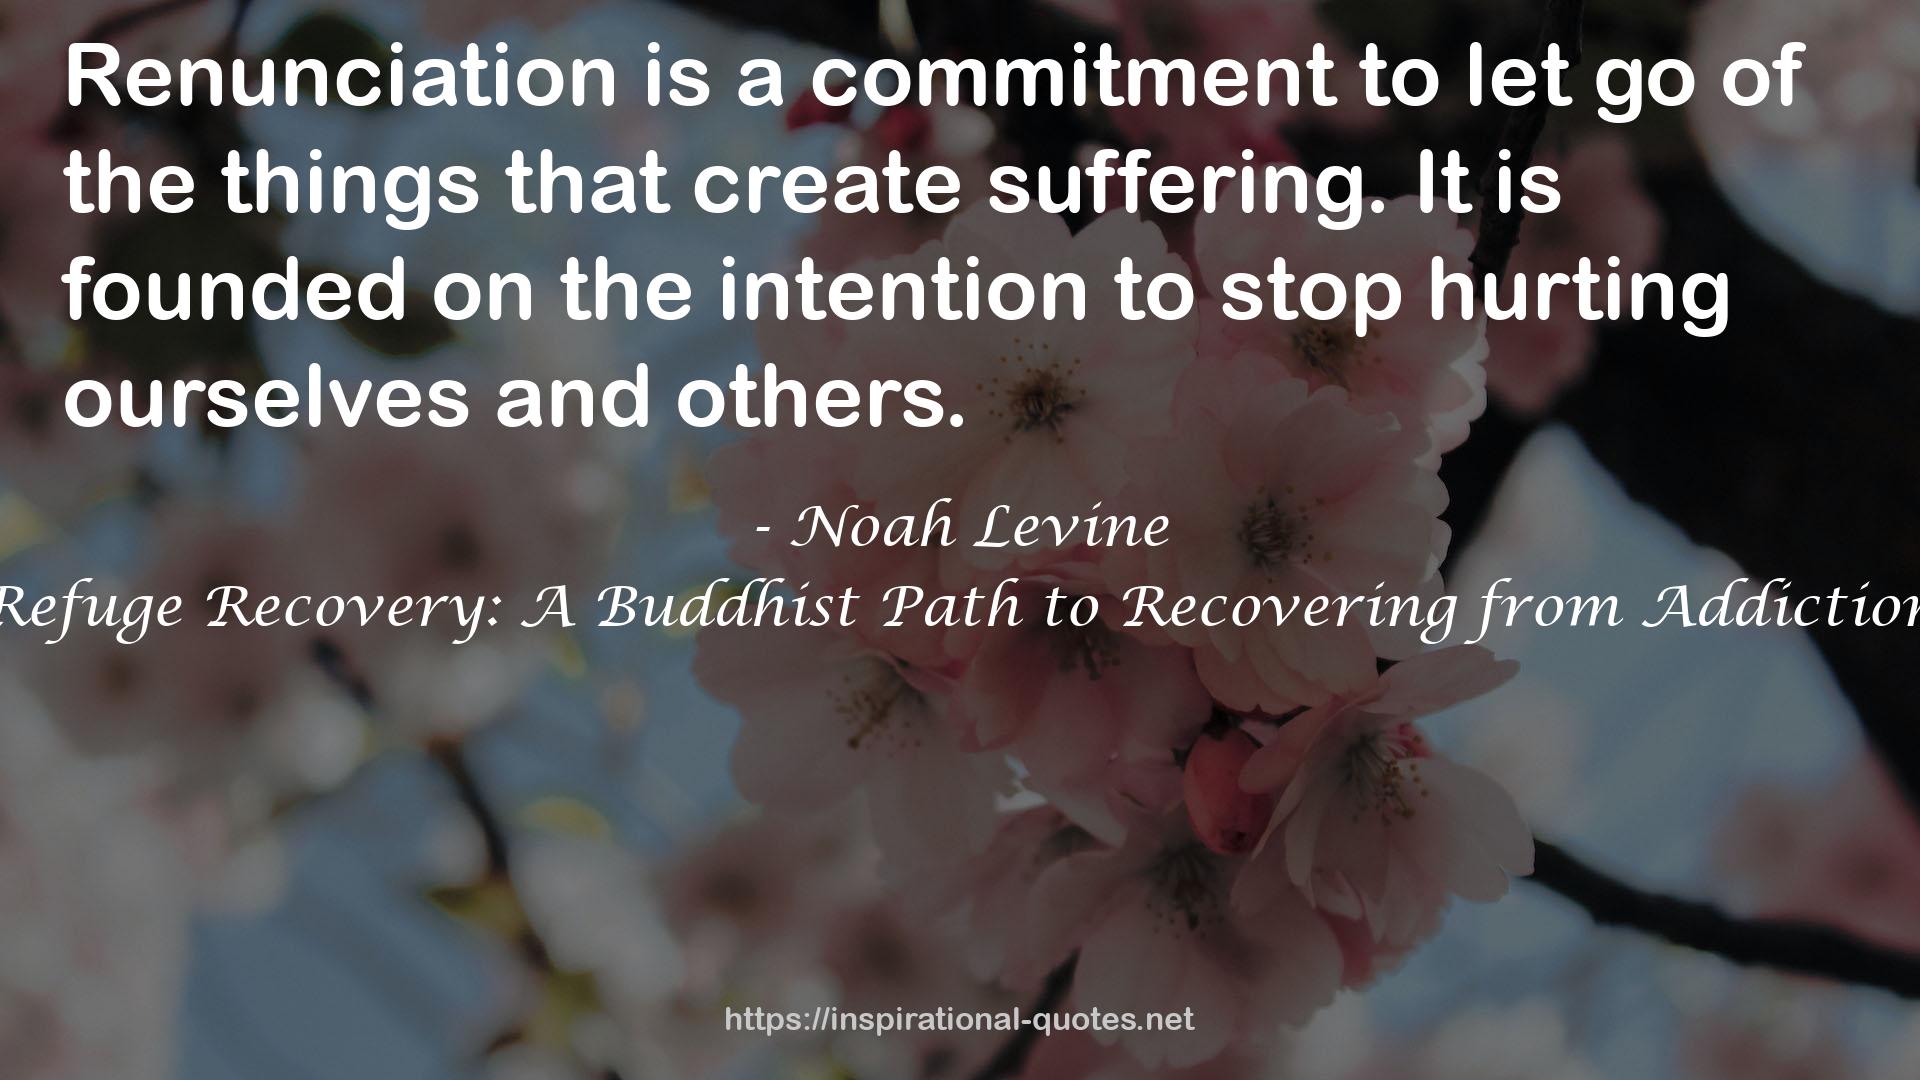 Refuge Recovery: A Buddhist Path to Recovering from Addiction QUOTES